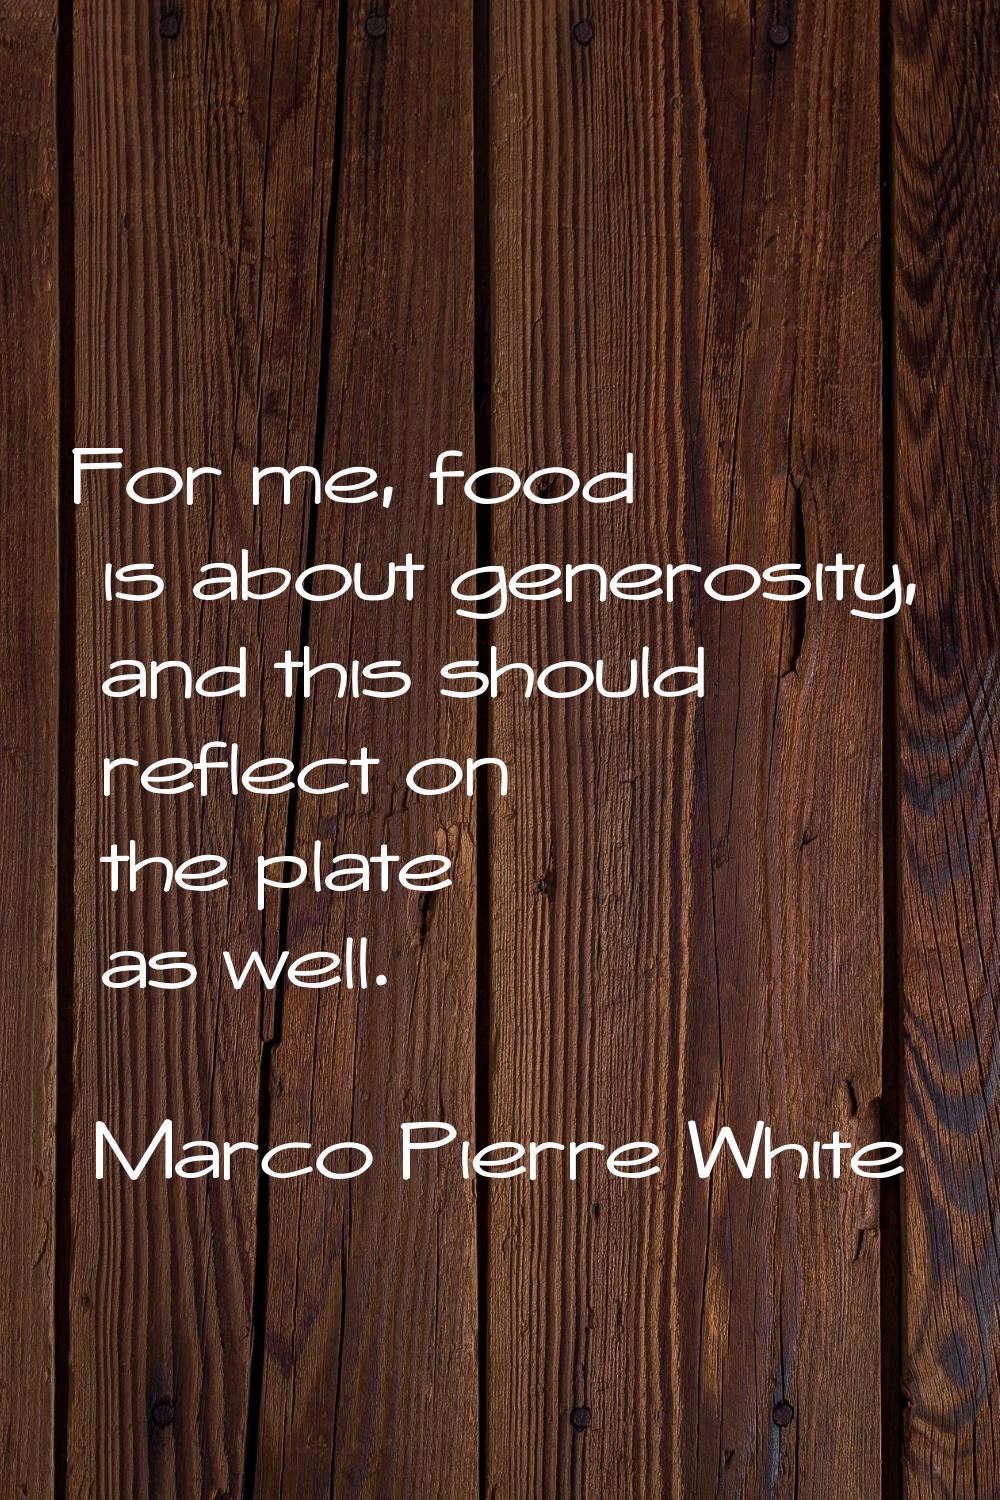 For me, food is about generosity, and this should reflect on the plate as well.